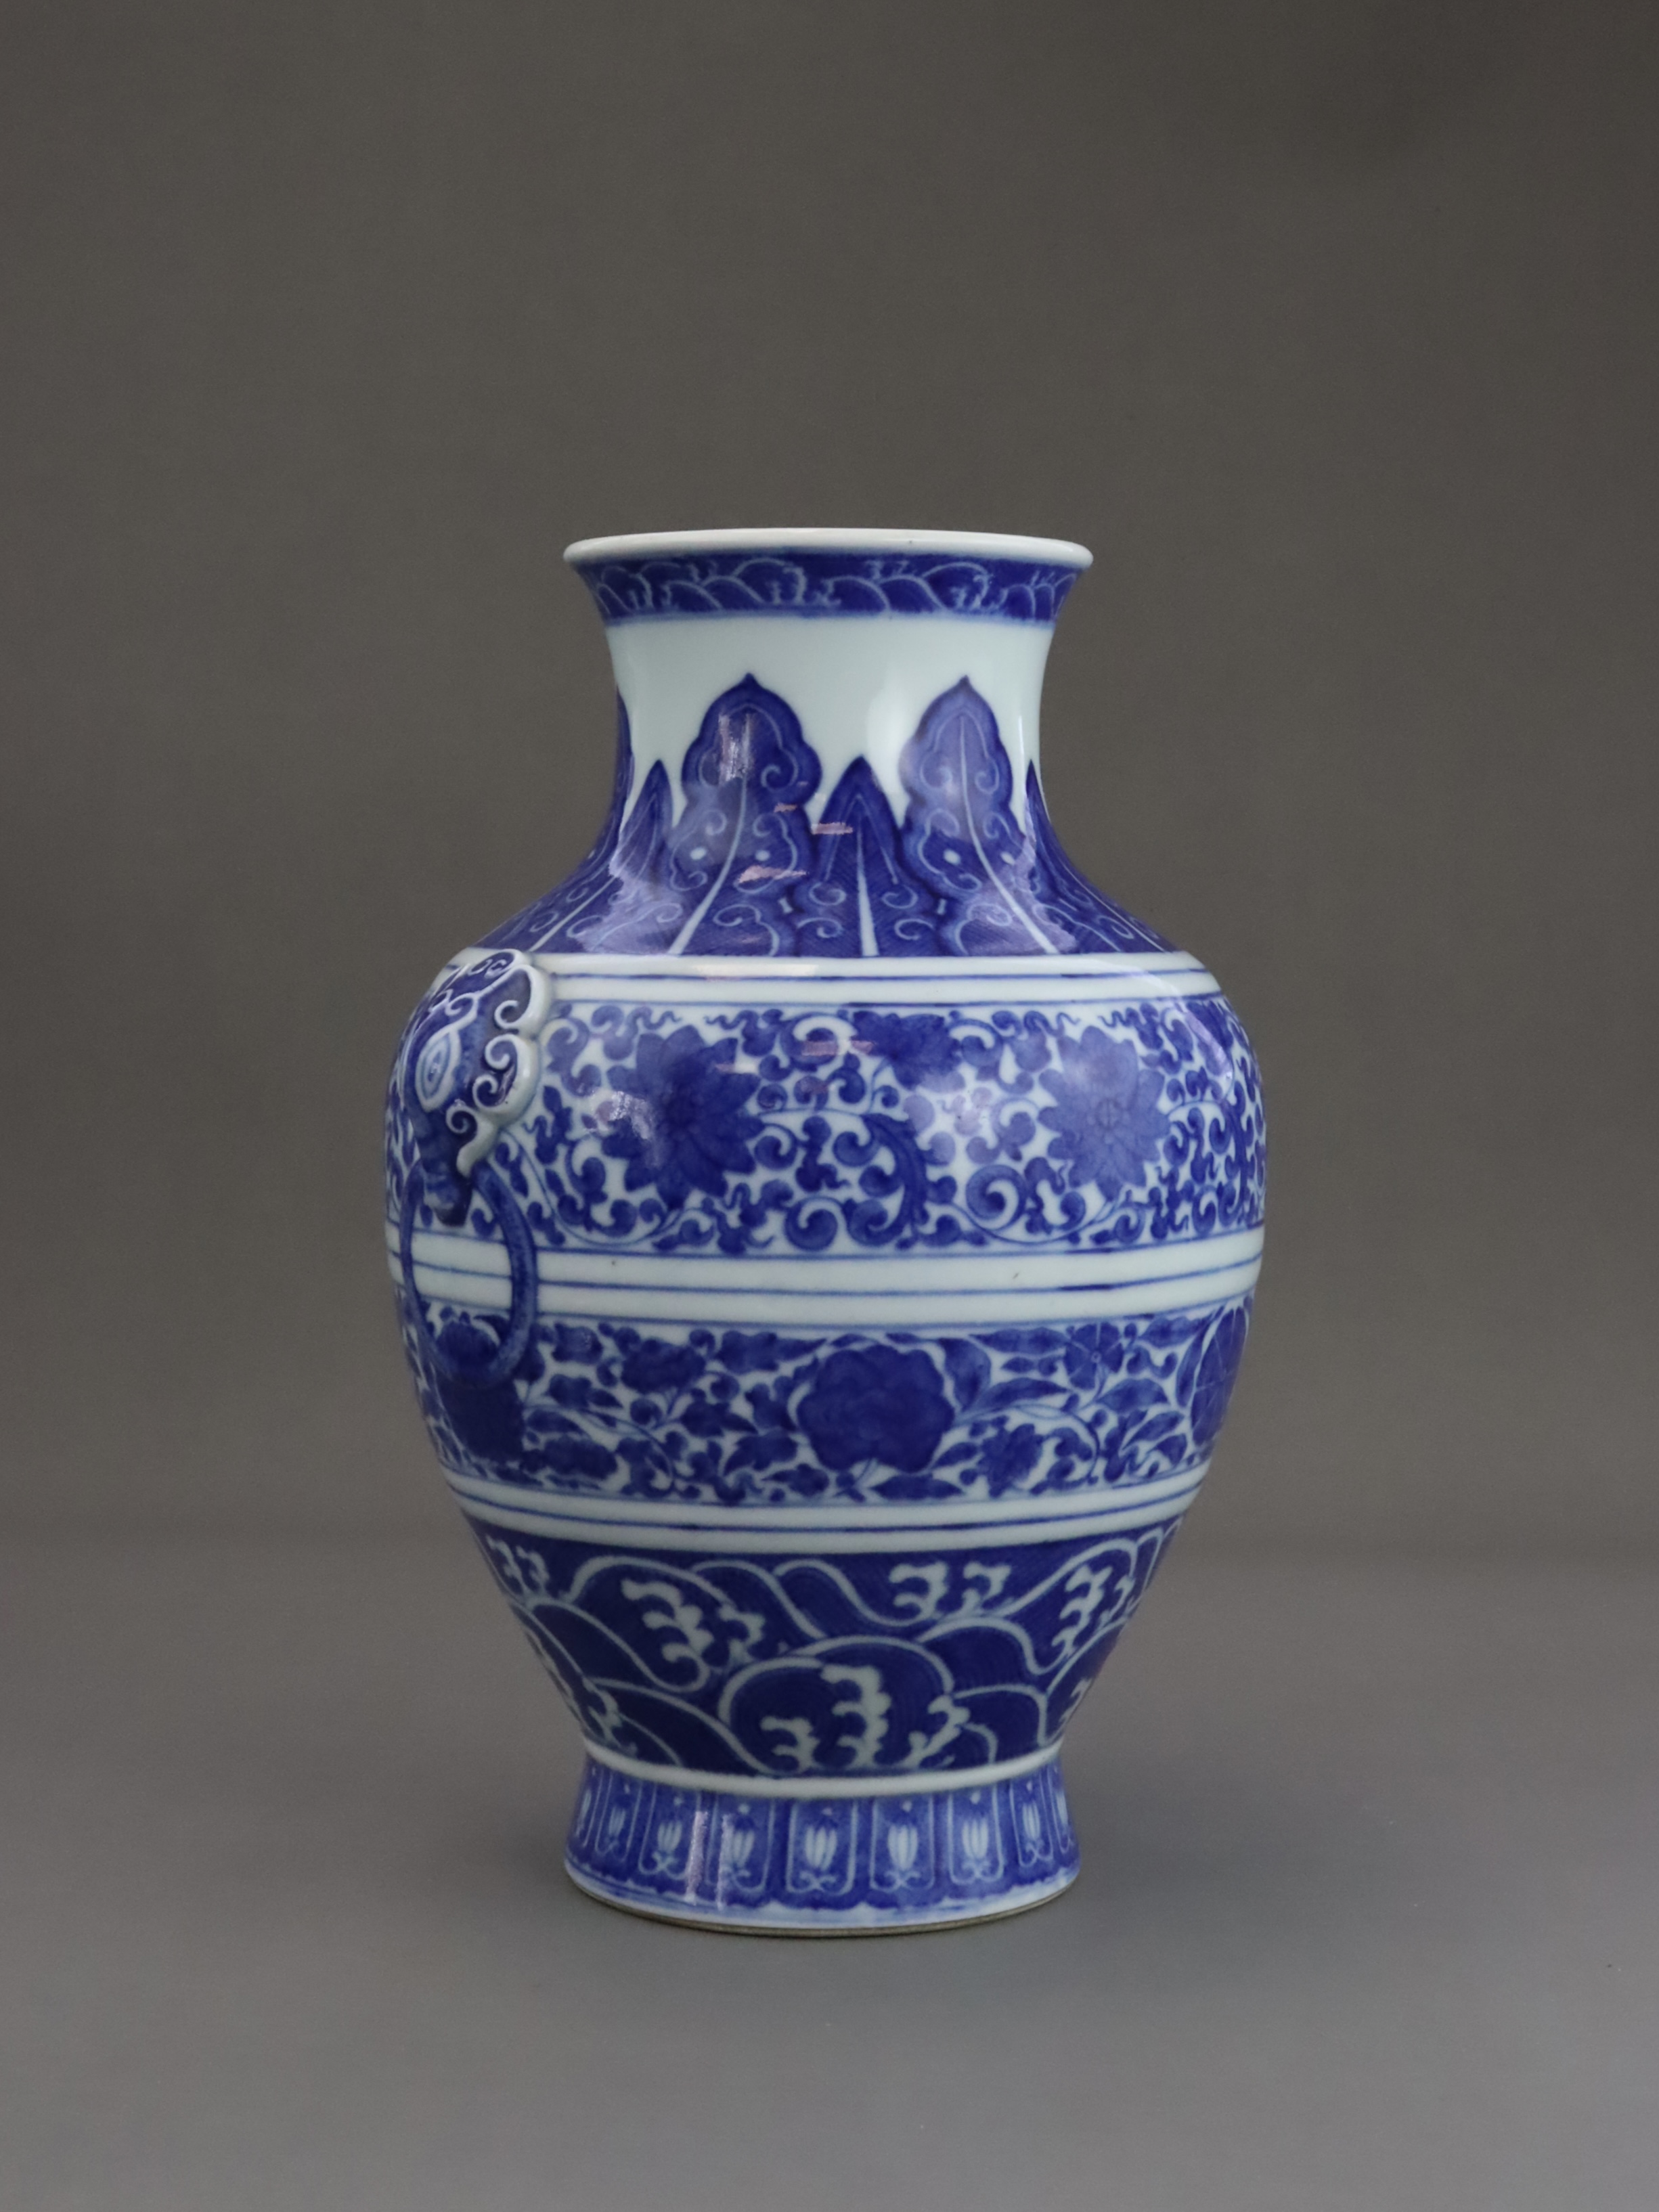 A Good Blue and White Ming style Vase, hu, six character seal mark of Qianlong, Qing dynasty, - Image 6 of 9